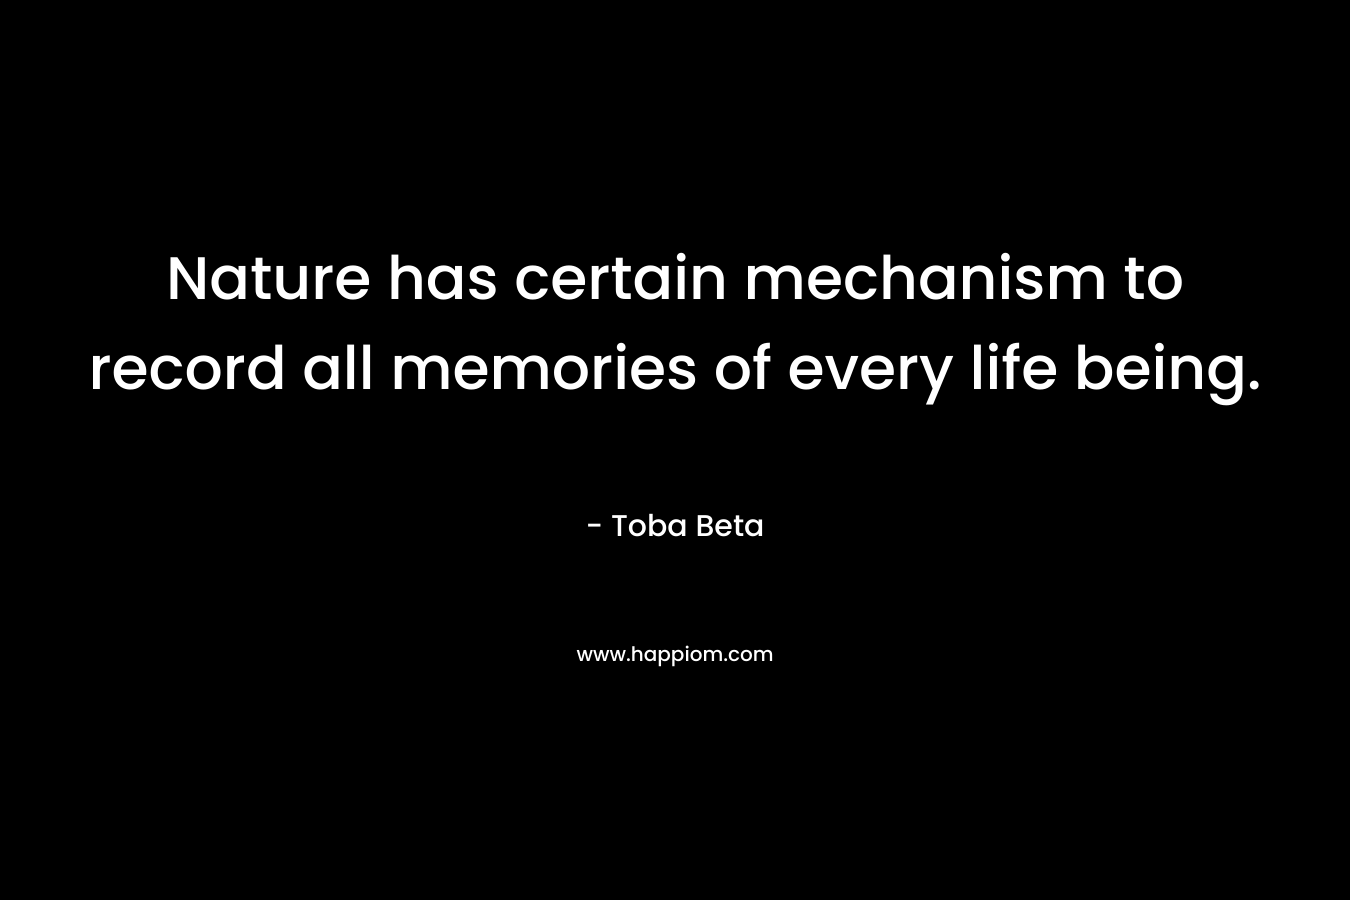 Nature has certain mechanism to record all memories of every life being.